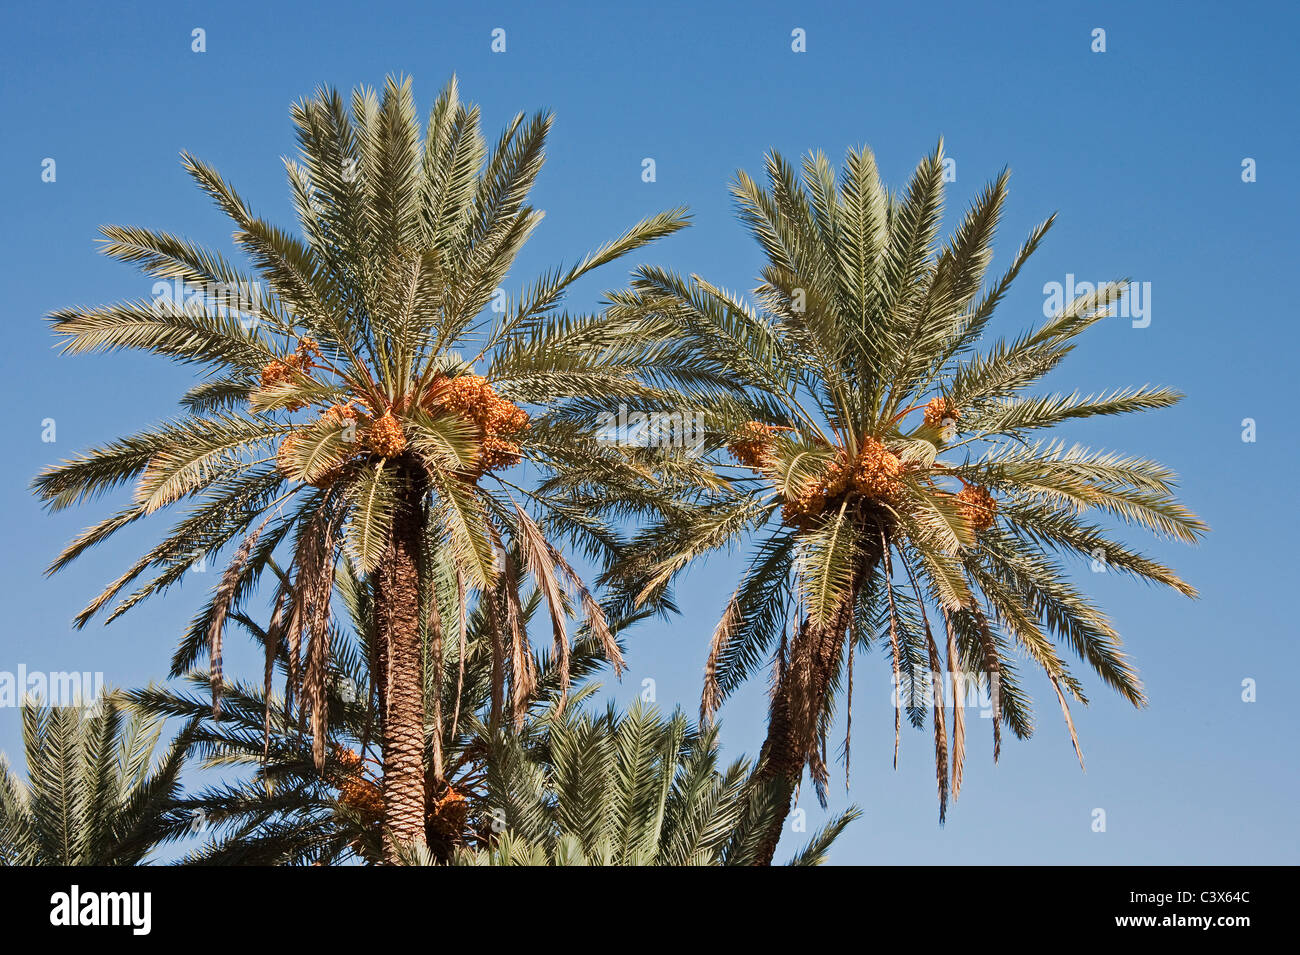 Date Palm (Phoenix dactylifera) with bunches of ripe dates ready to be harvested. Morocco. Stock Photo